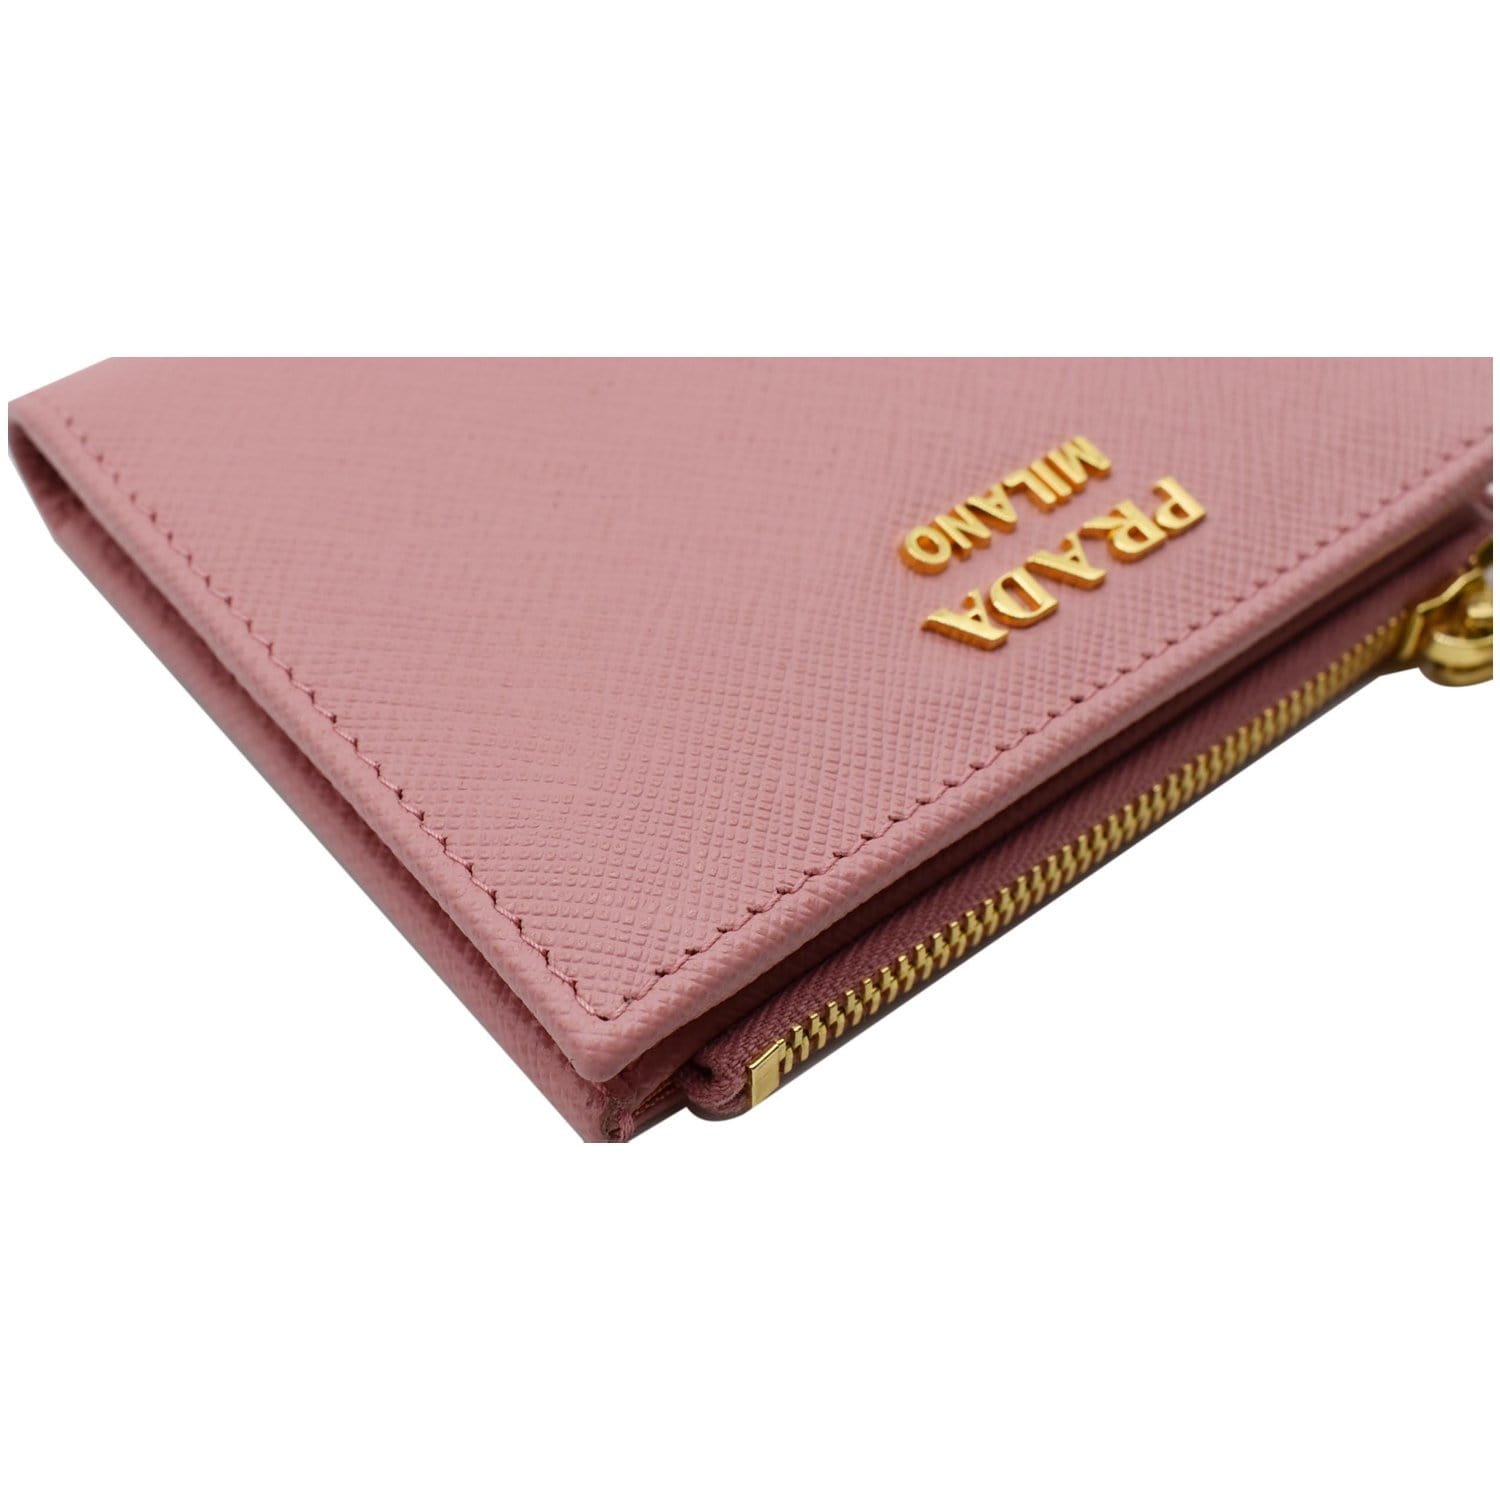 Prada Small Saffiano and Leather Wallet, Women, Alabaster Pink